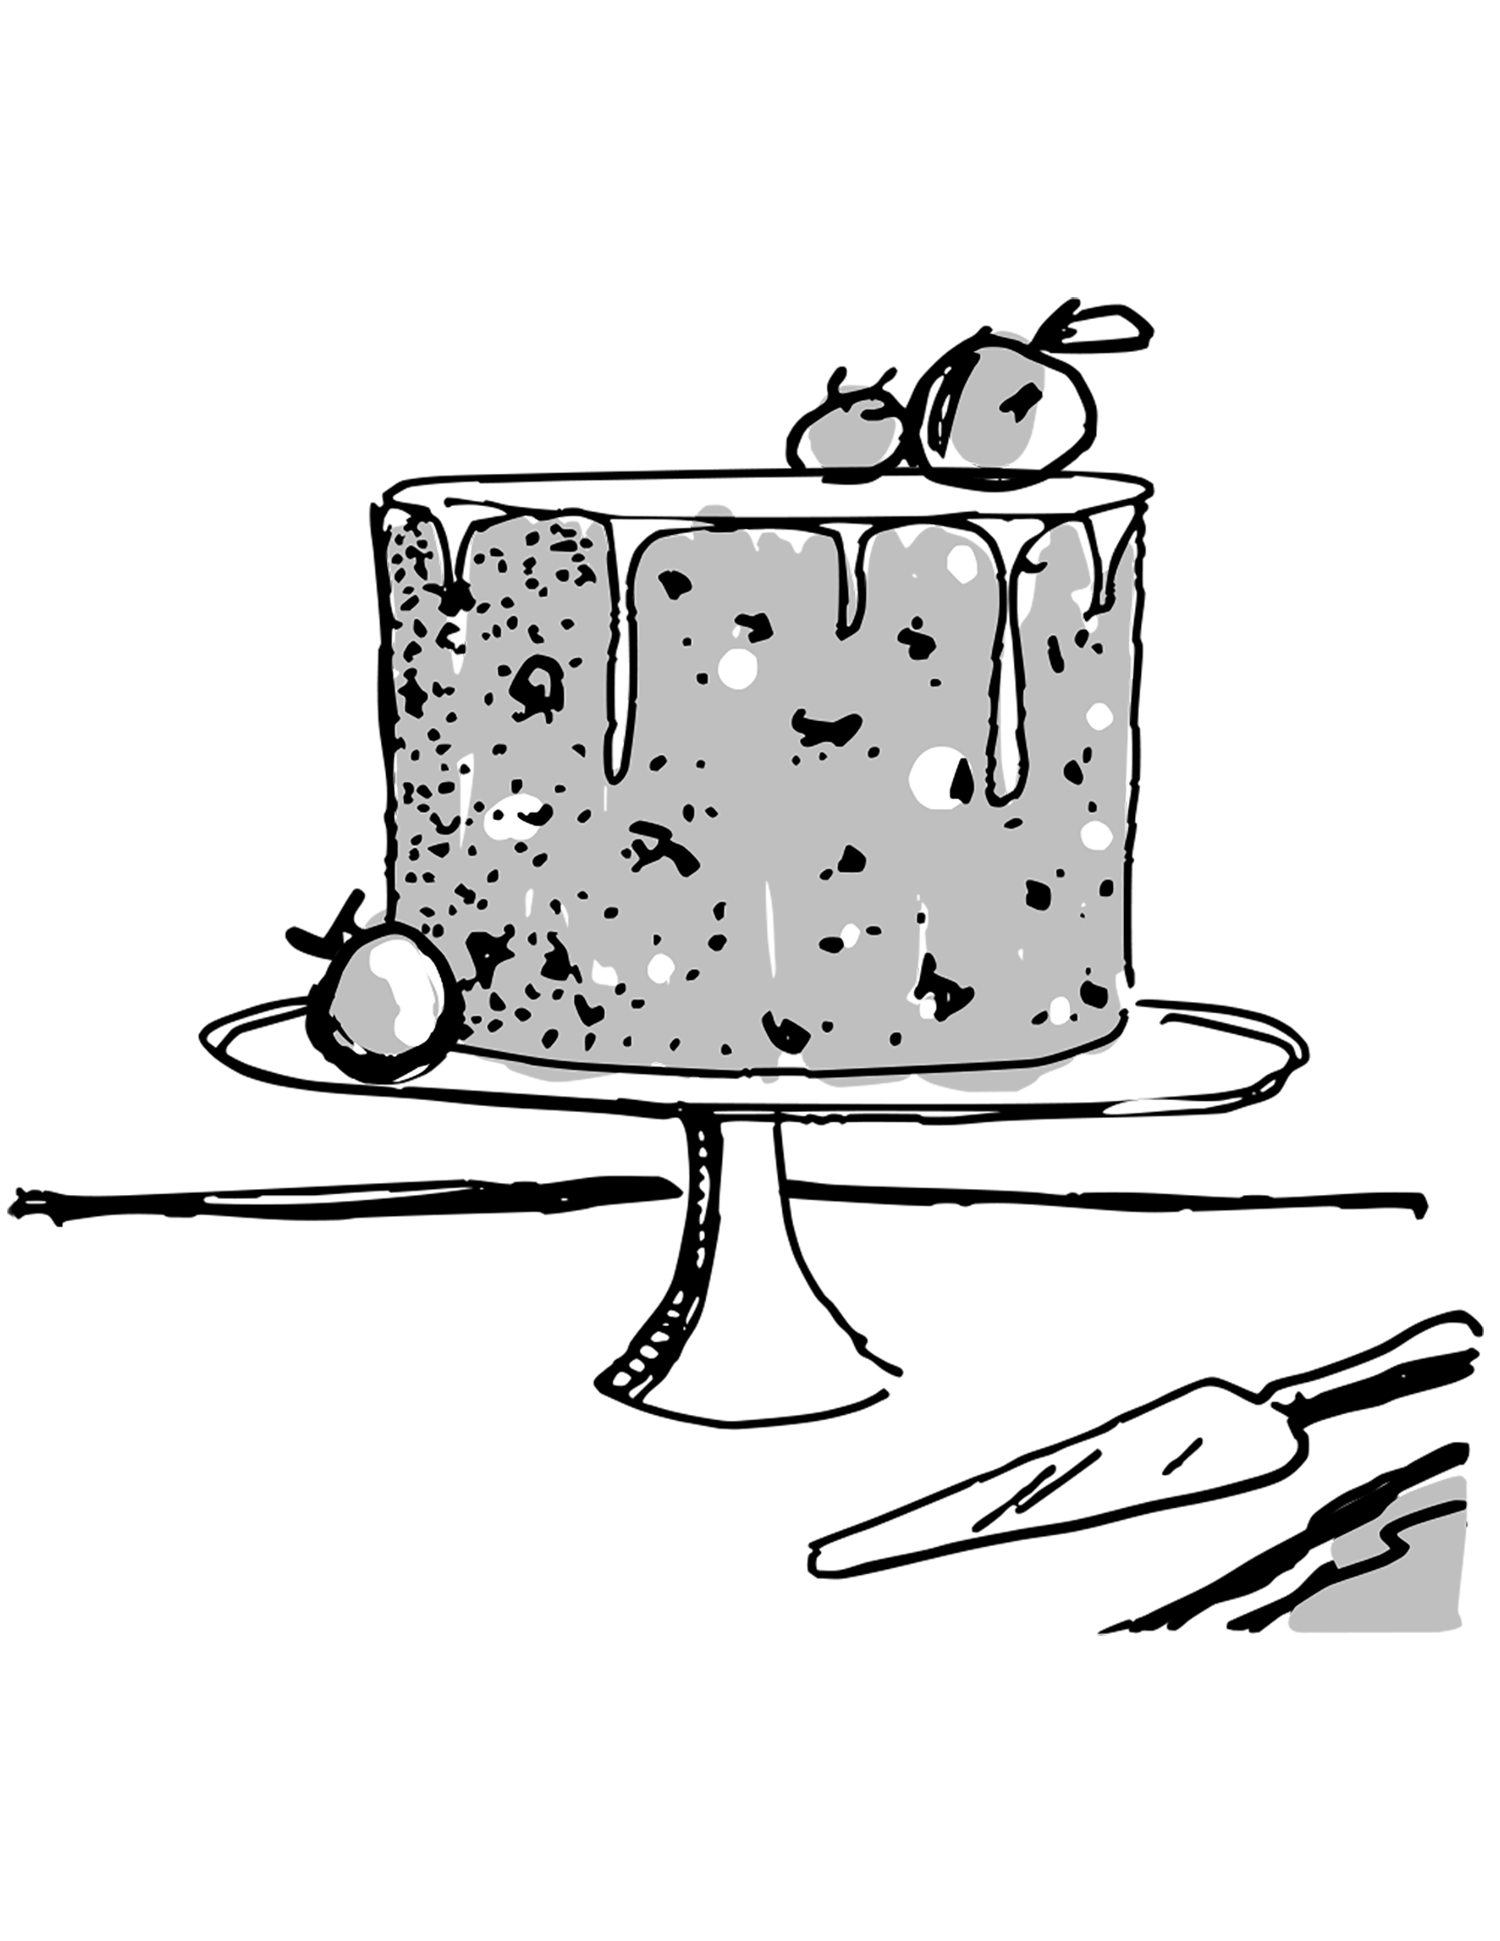 a sketch of a cake with a glaze dripping down the side